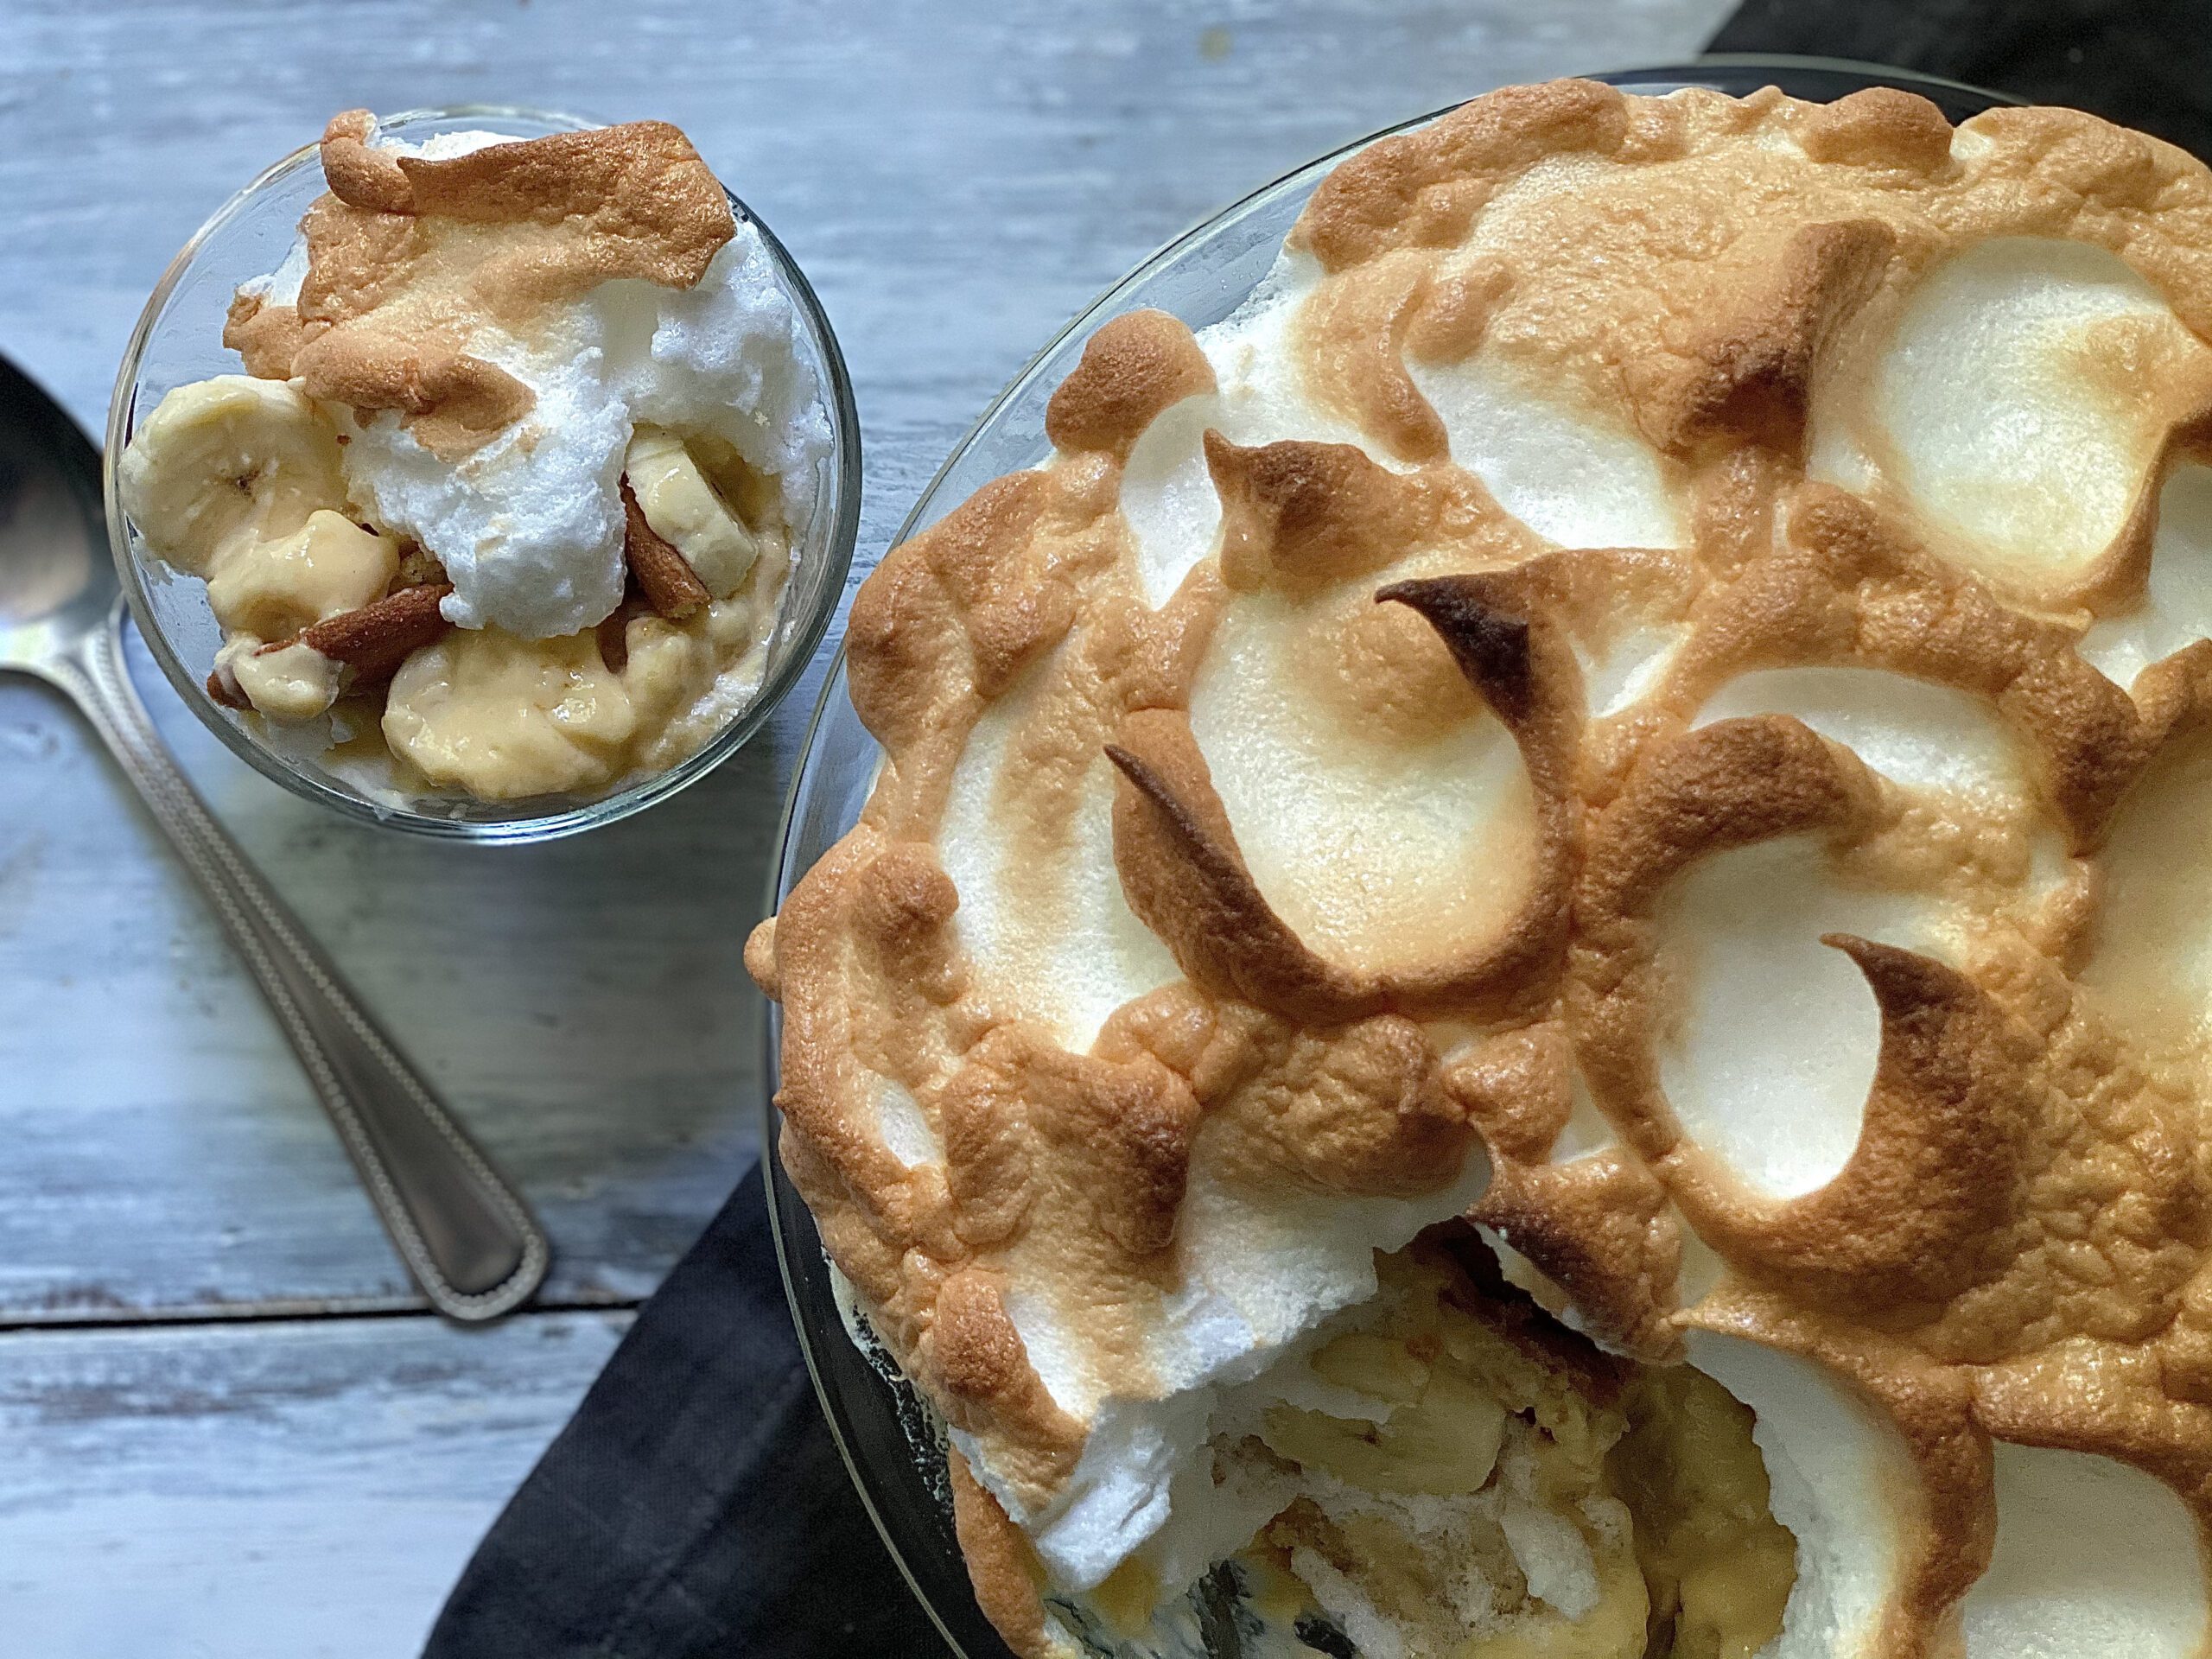 Golden brown baked banana pudding topped with fluffy meringue, a classic Southern dessert with homemade vanilla wafers.